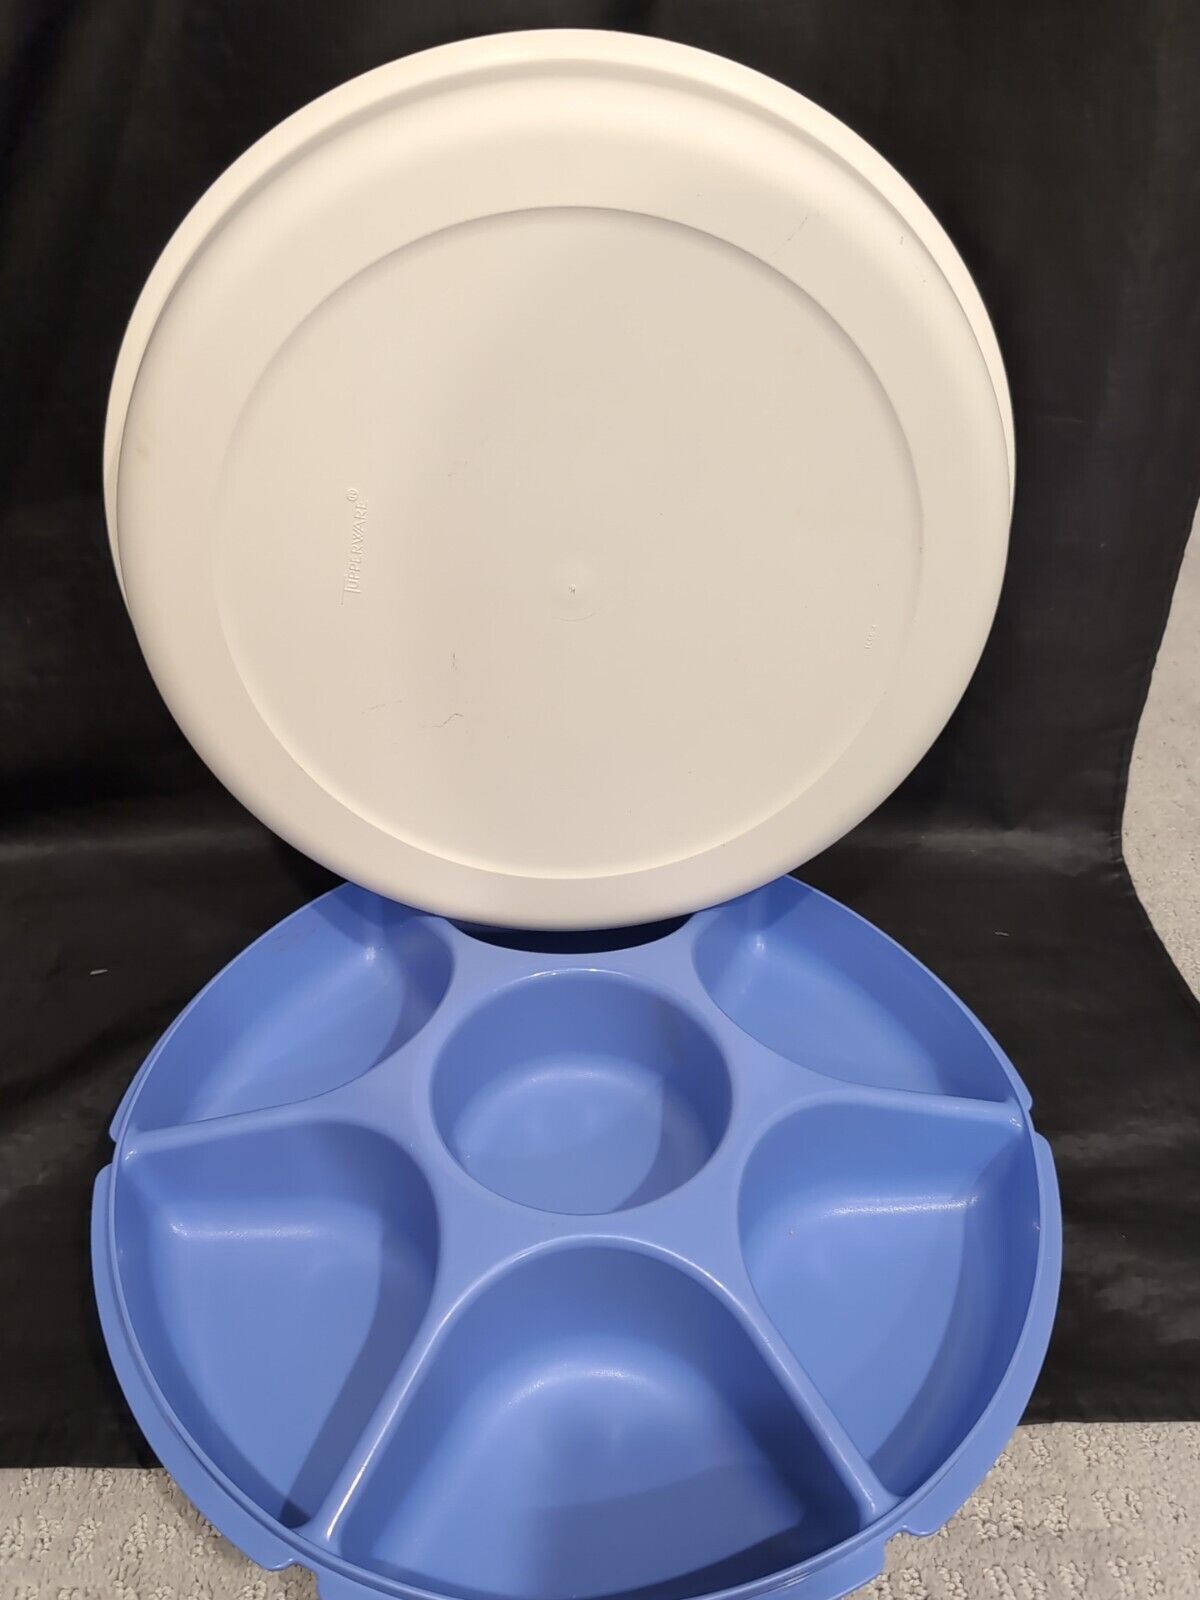 Tupperware Serving Center Set Large Divided Tray Mold # 1665 Blue & White